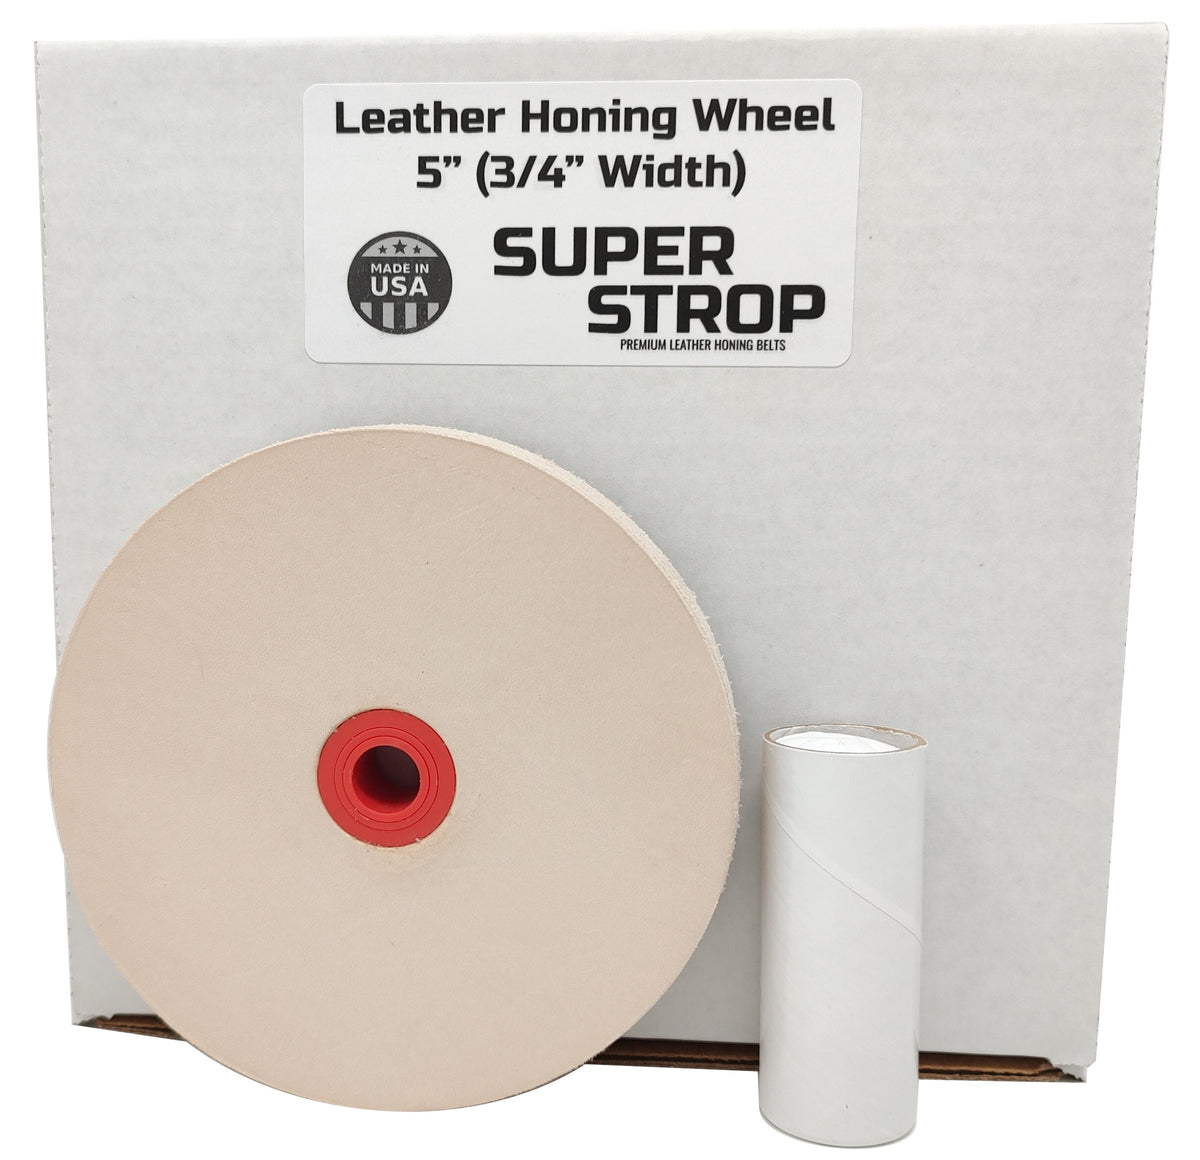 Leather Honing Wheel Buffing Compound Included Pro Sharpening Supplies 3/4 Width 5 